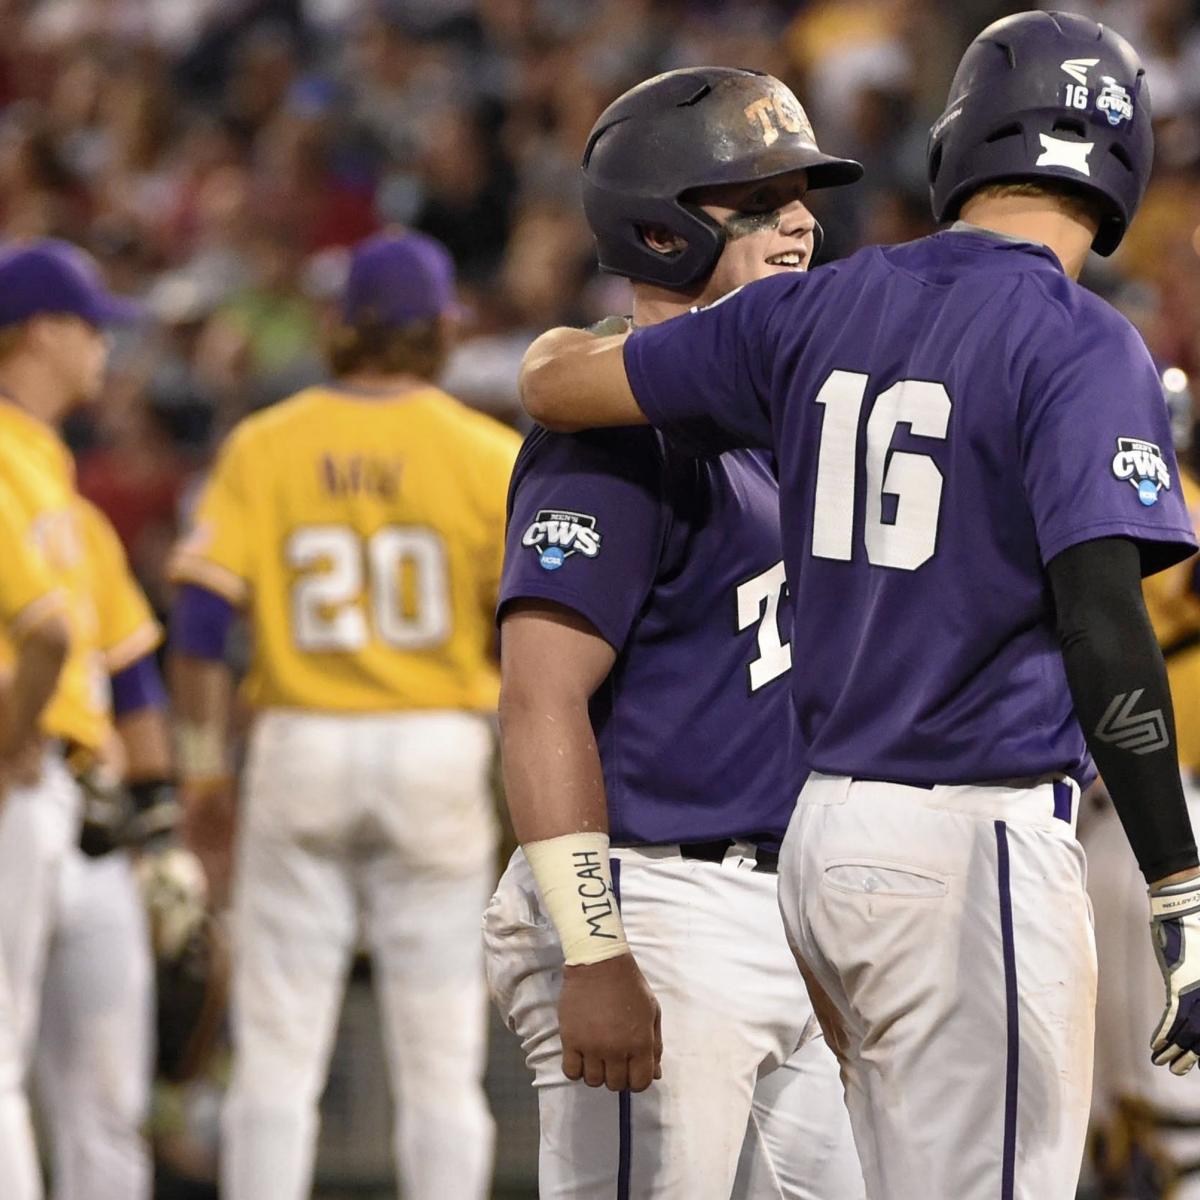 College Baseball World Series 2015: Thursday Scores, Winners and ...